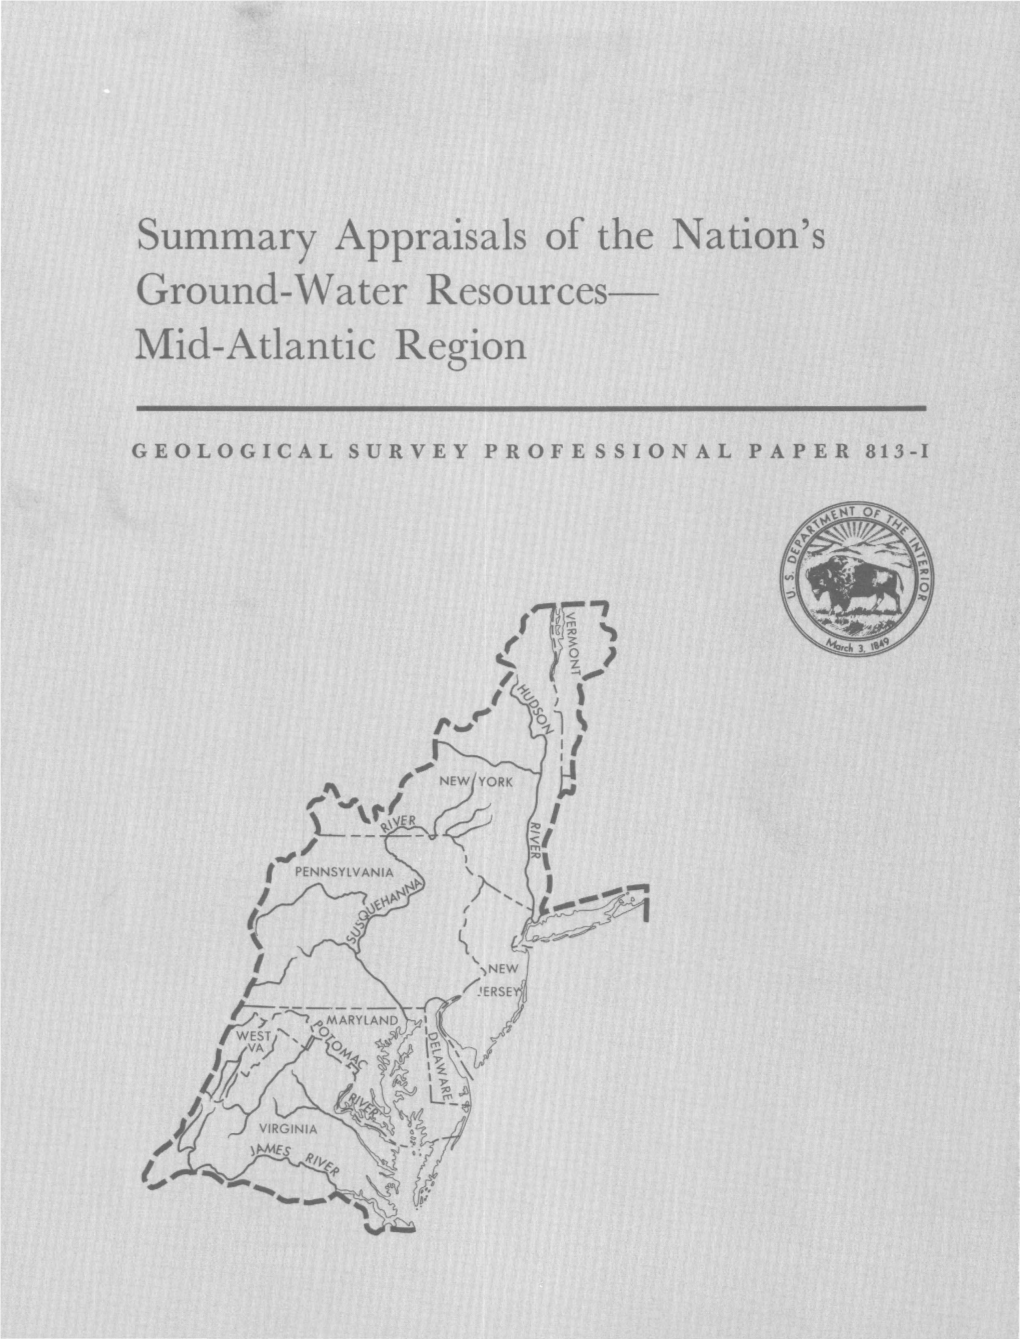 Summary Appraisals of the Nation's Ground-Water Resources- Mid-Atlantic Region